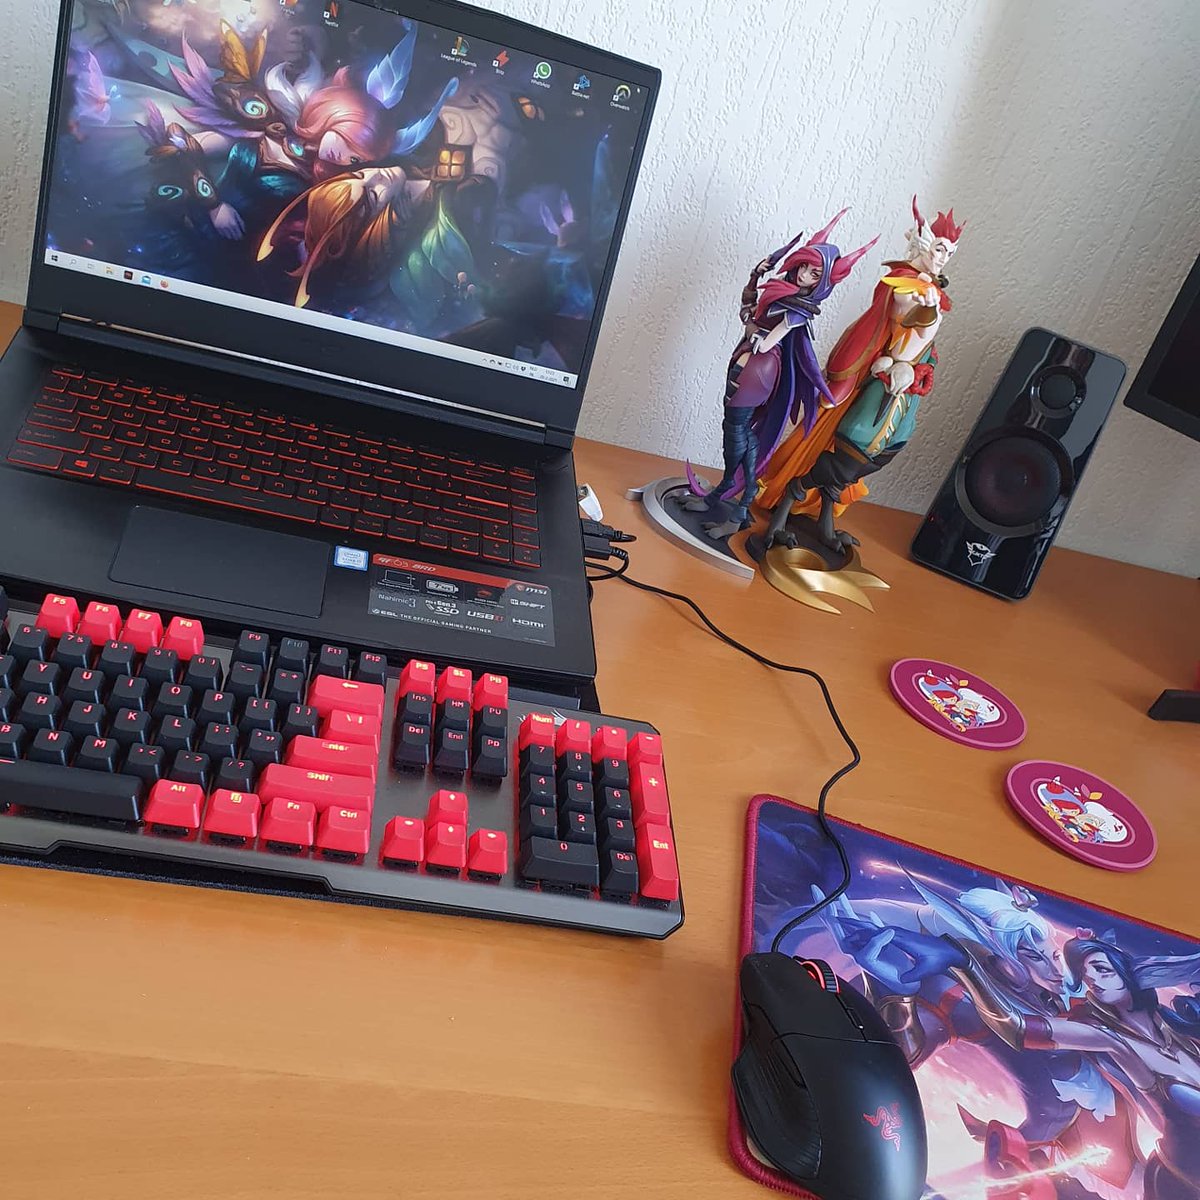 Couple goals right here!

You could say that I love Xayah and Rakan 🥰😍💕

#Riot #riotgames #riotmerch #leagueoflegends #love #CoupleGoals